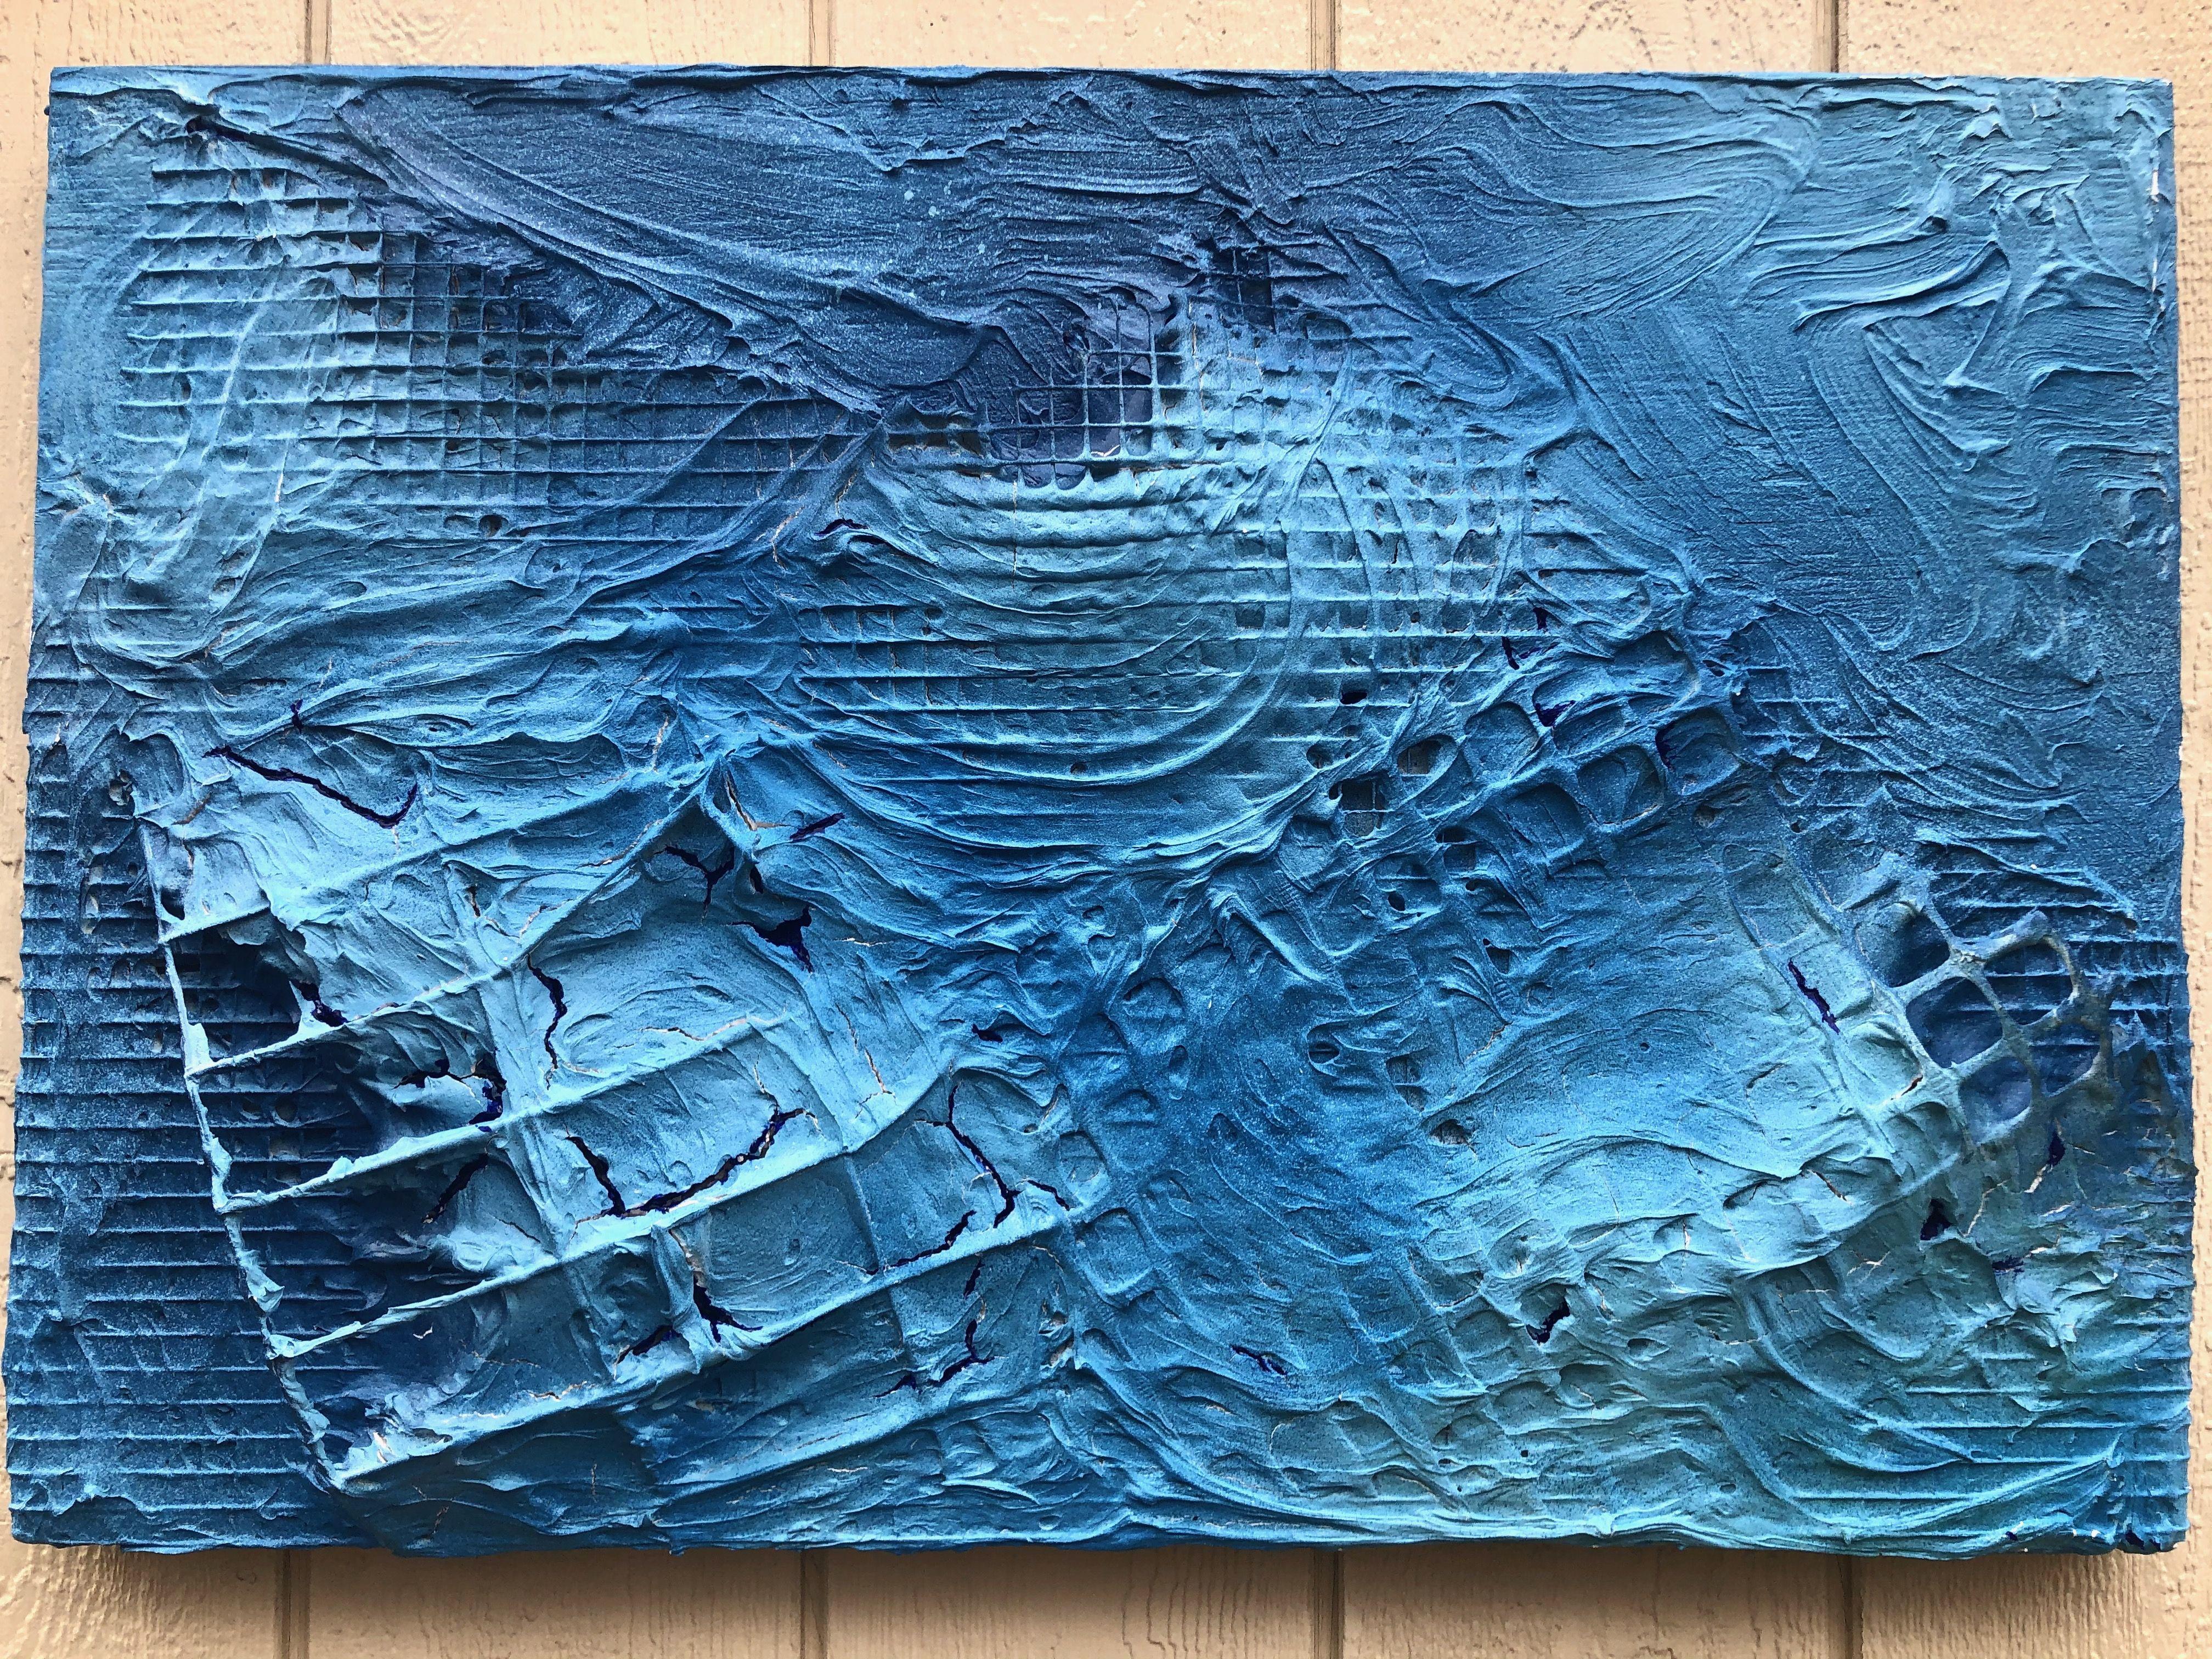 Ocean Waves, Mixed Media on Other - Abstract Mixed Media Art by Joel Blenz